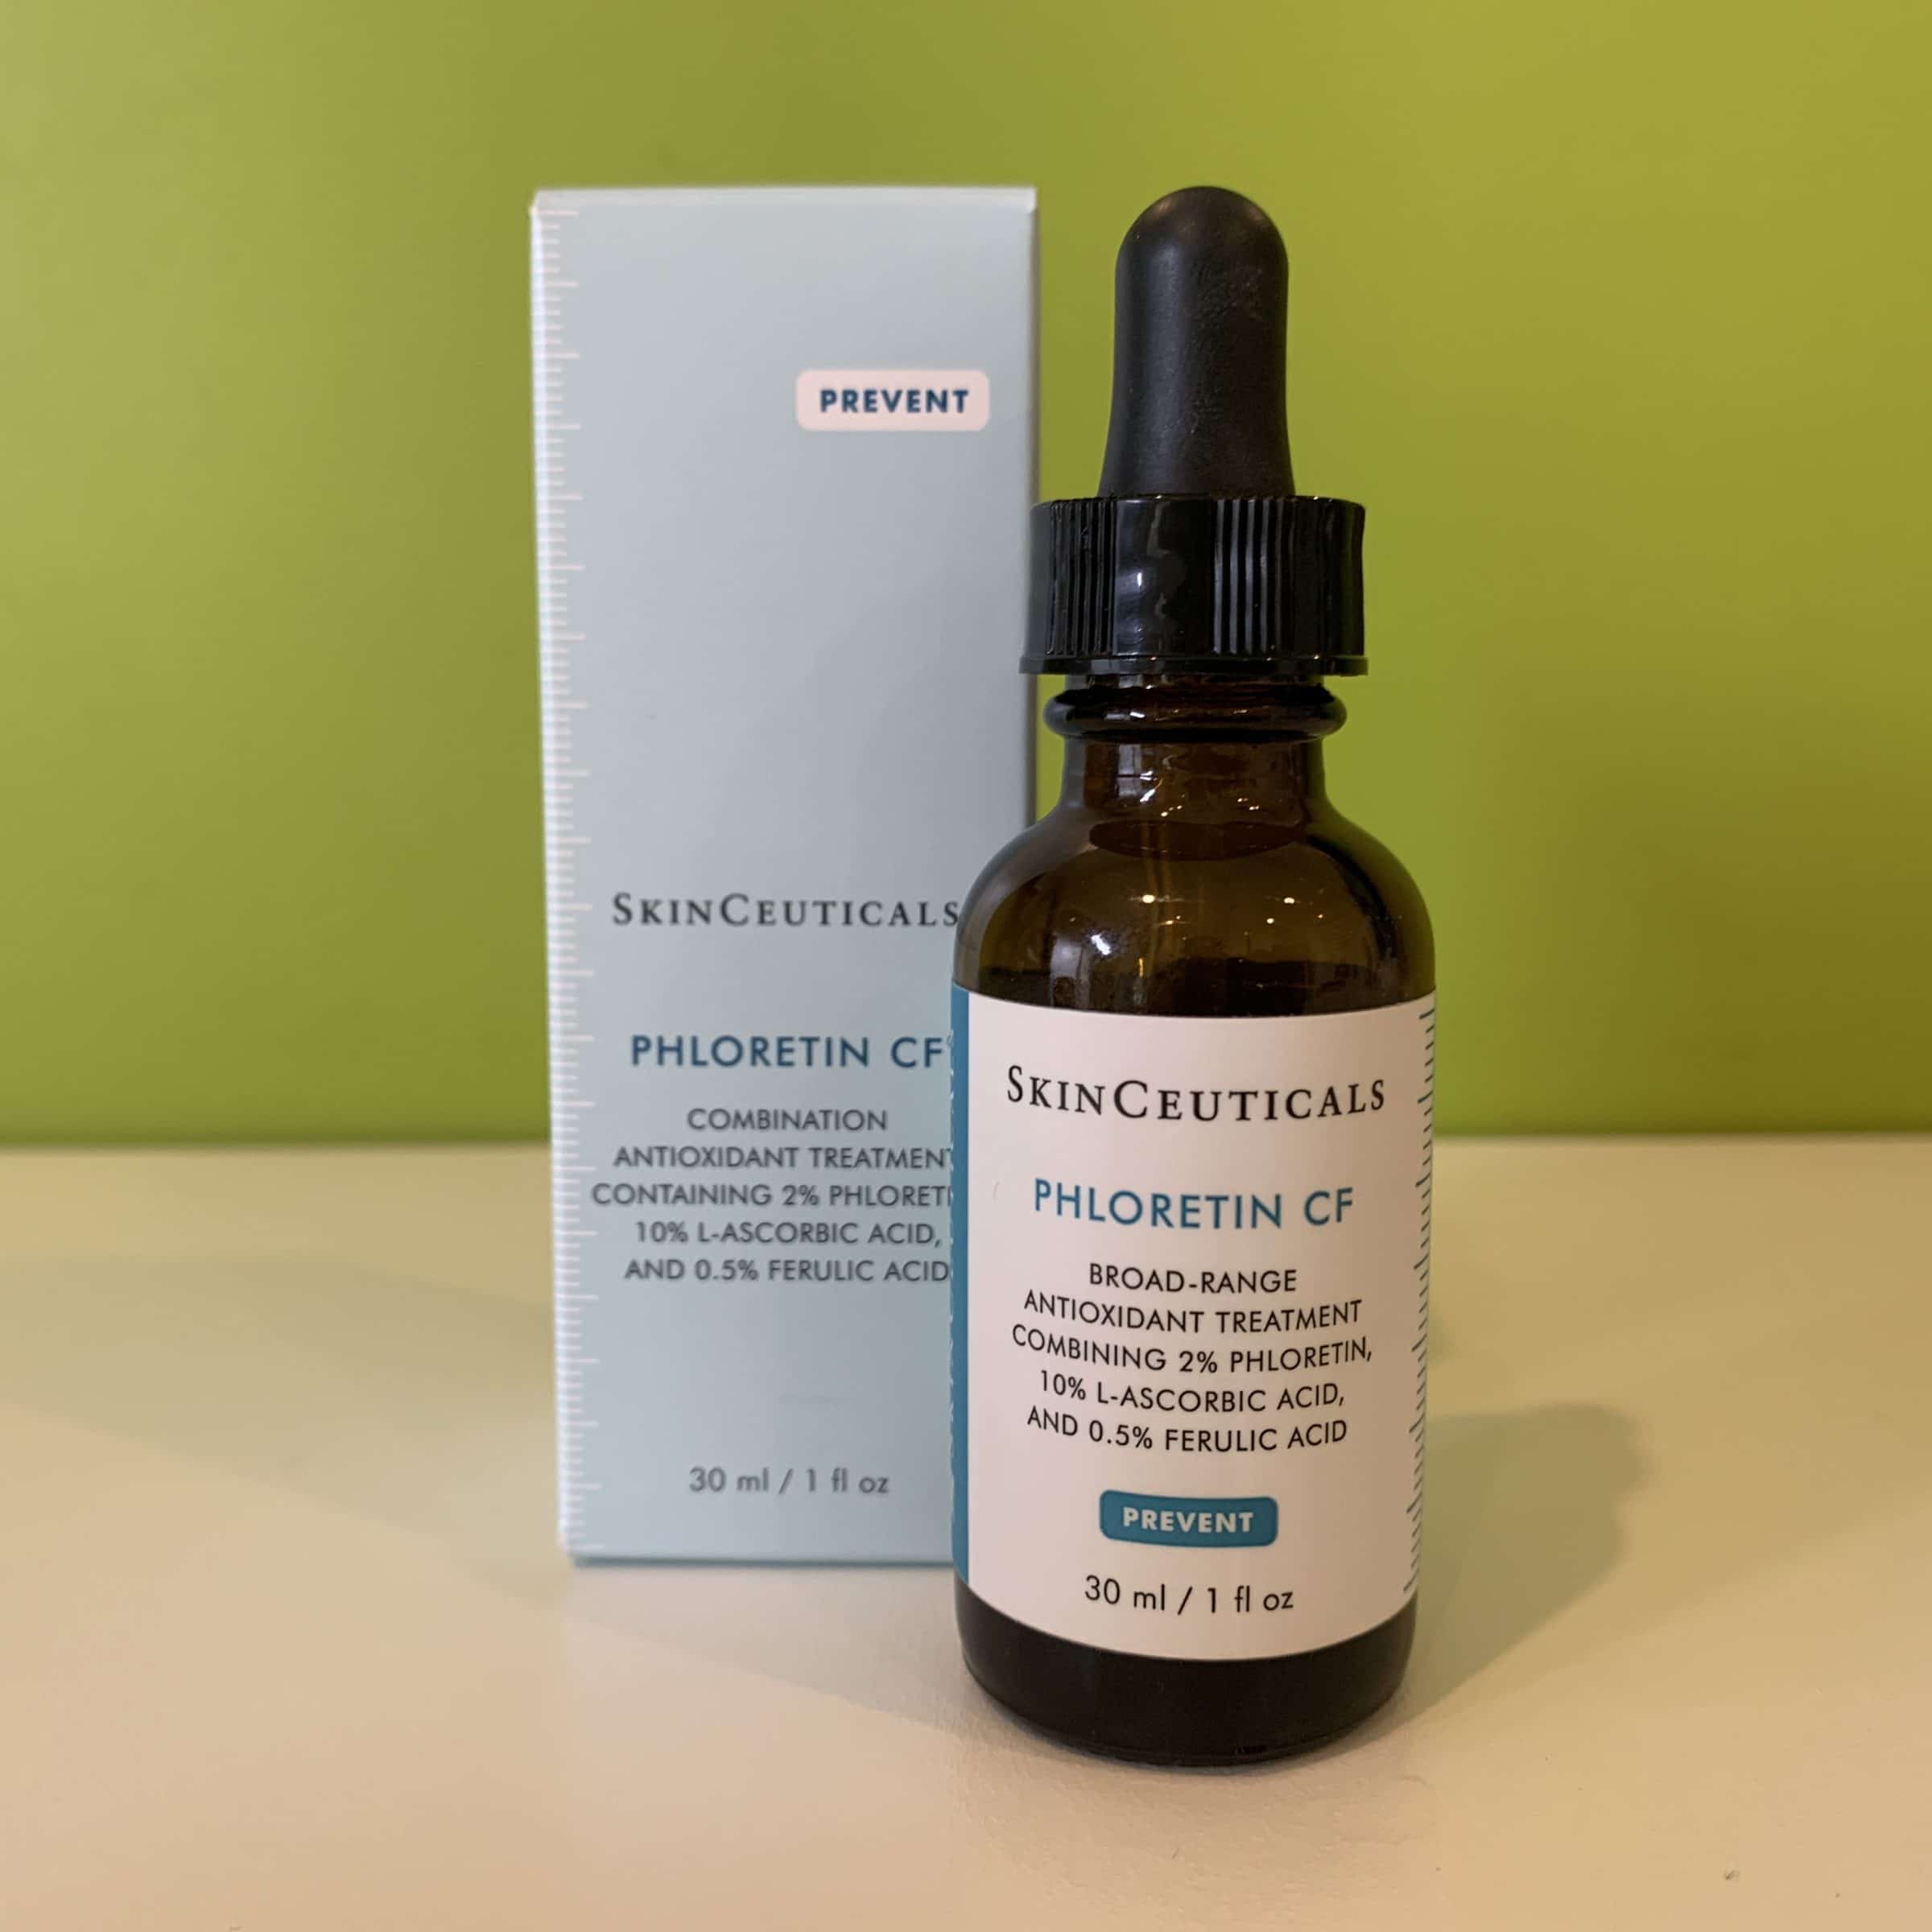 Phloretin CF WITH FERULIC ACID A patented daytime vitamin c antioxidant face serum that delivers advanced environmental protection and diminishes the appearance of fine lines and discoloration.